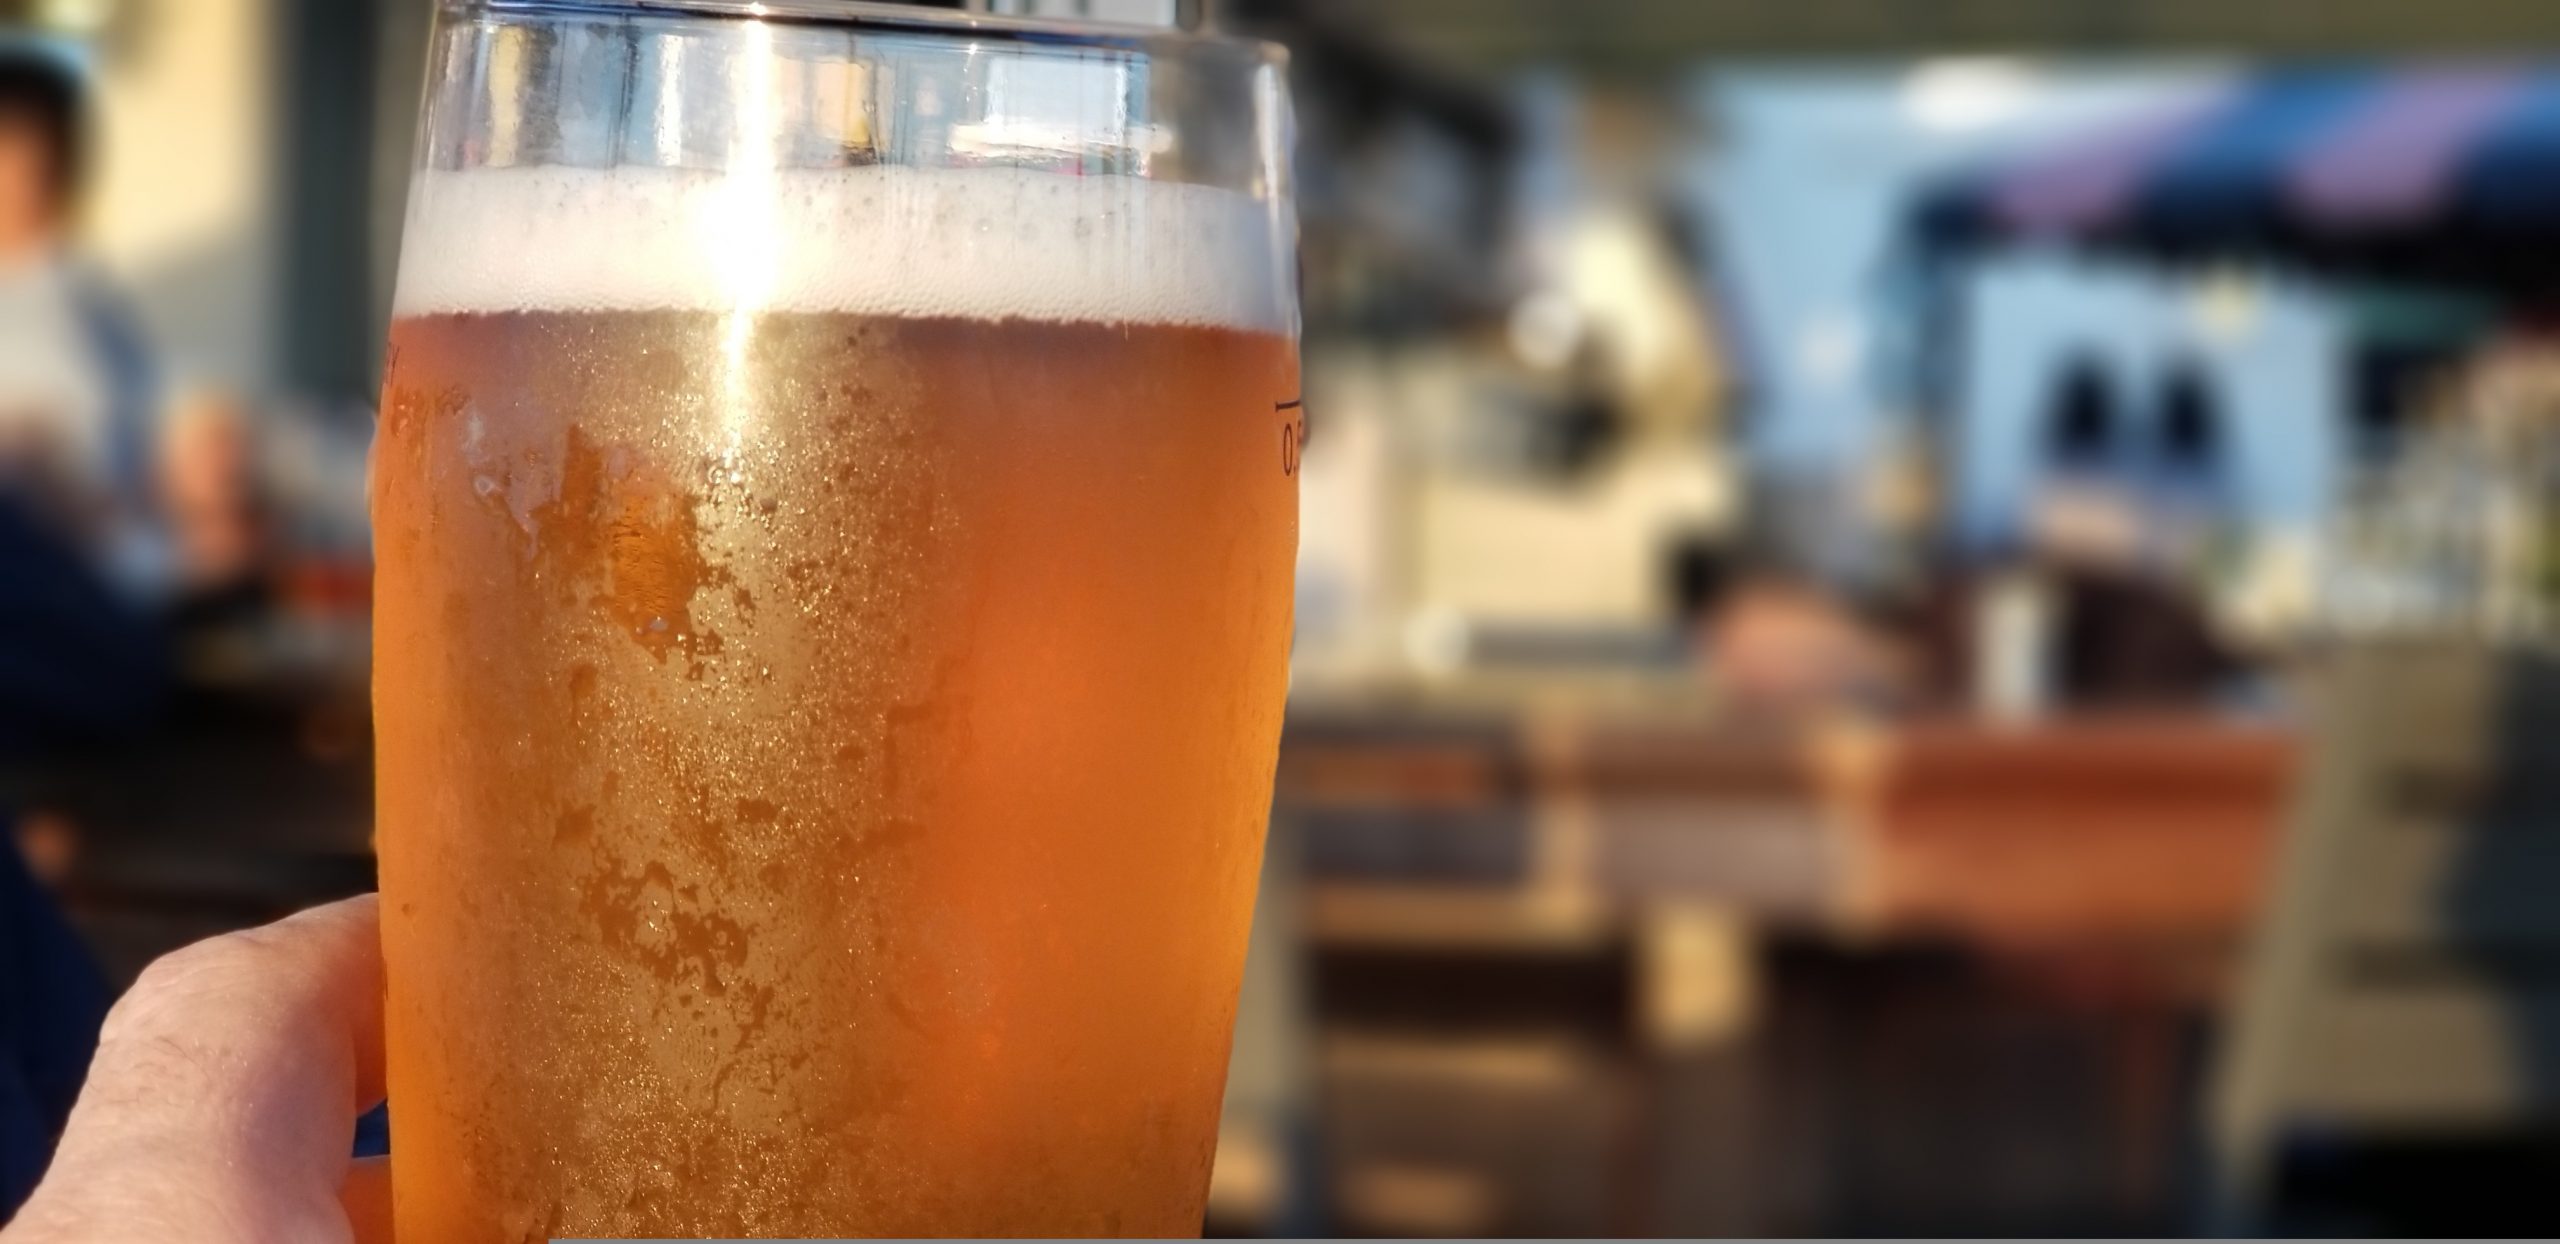 Beer consumption reaches all-time high in Spain